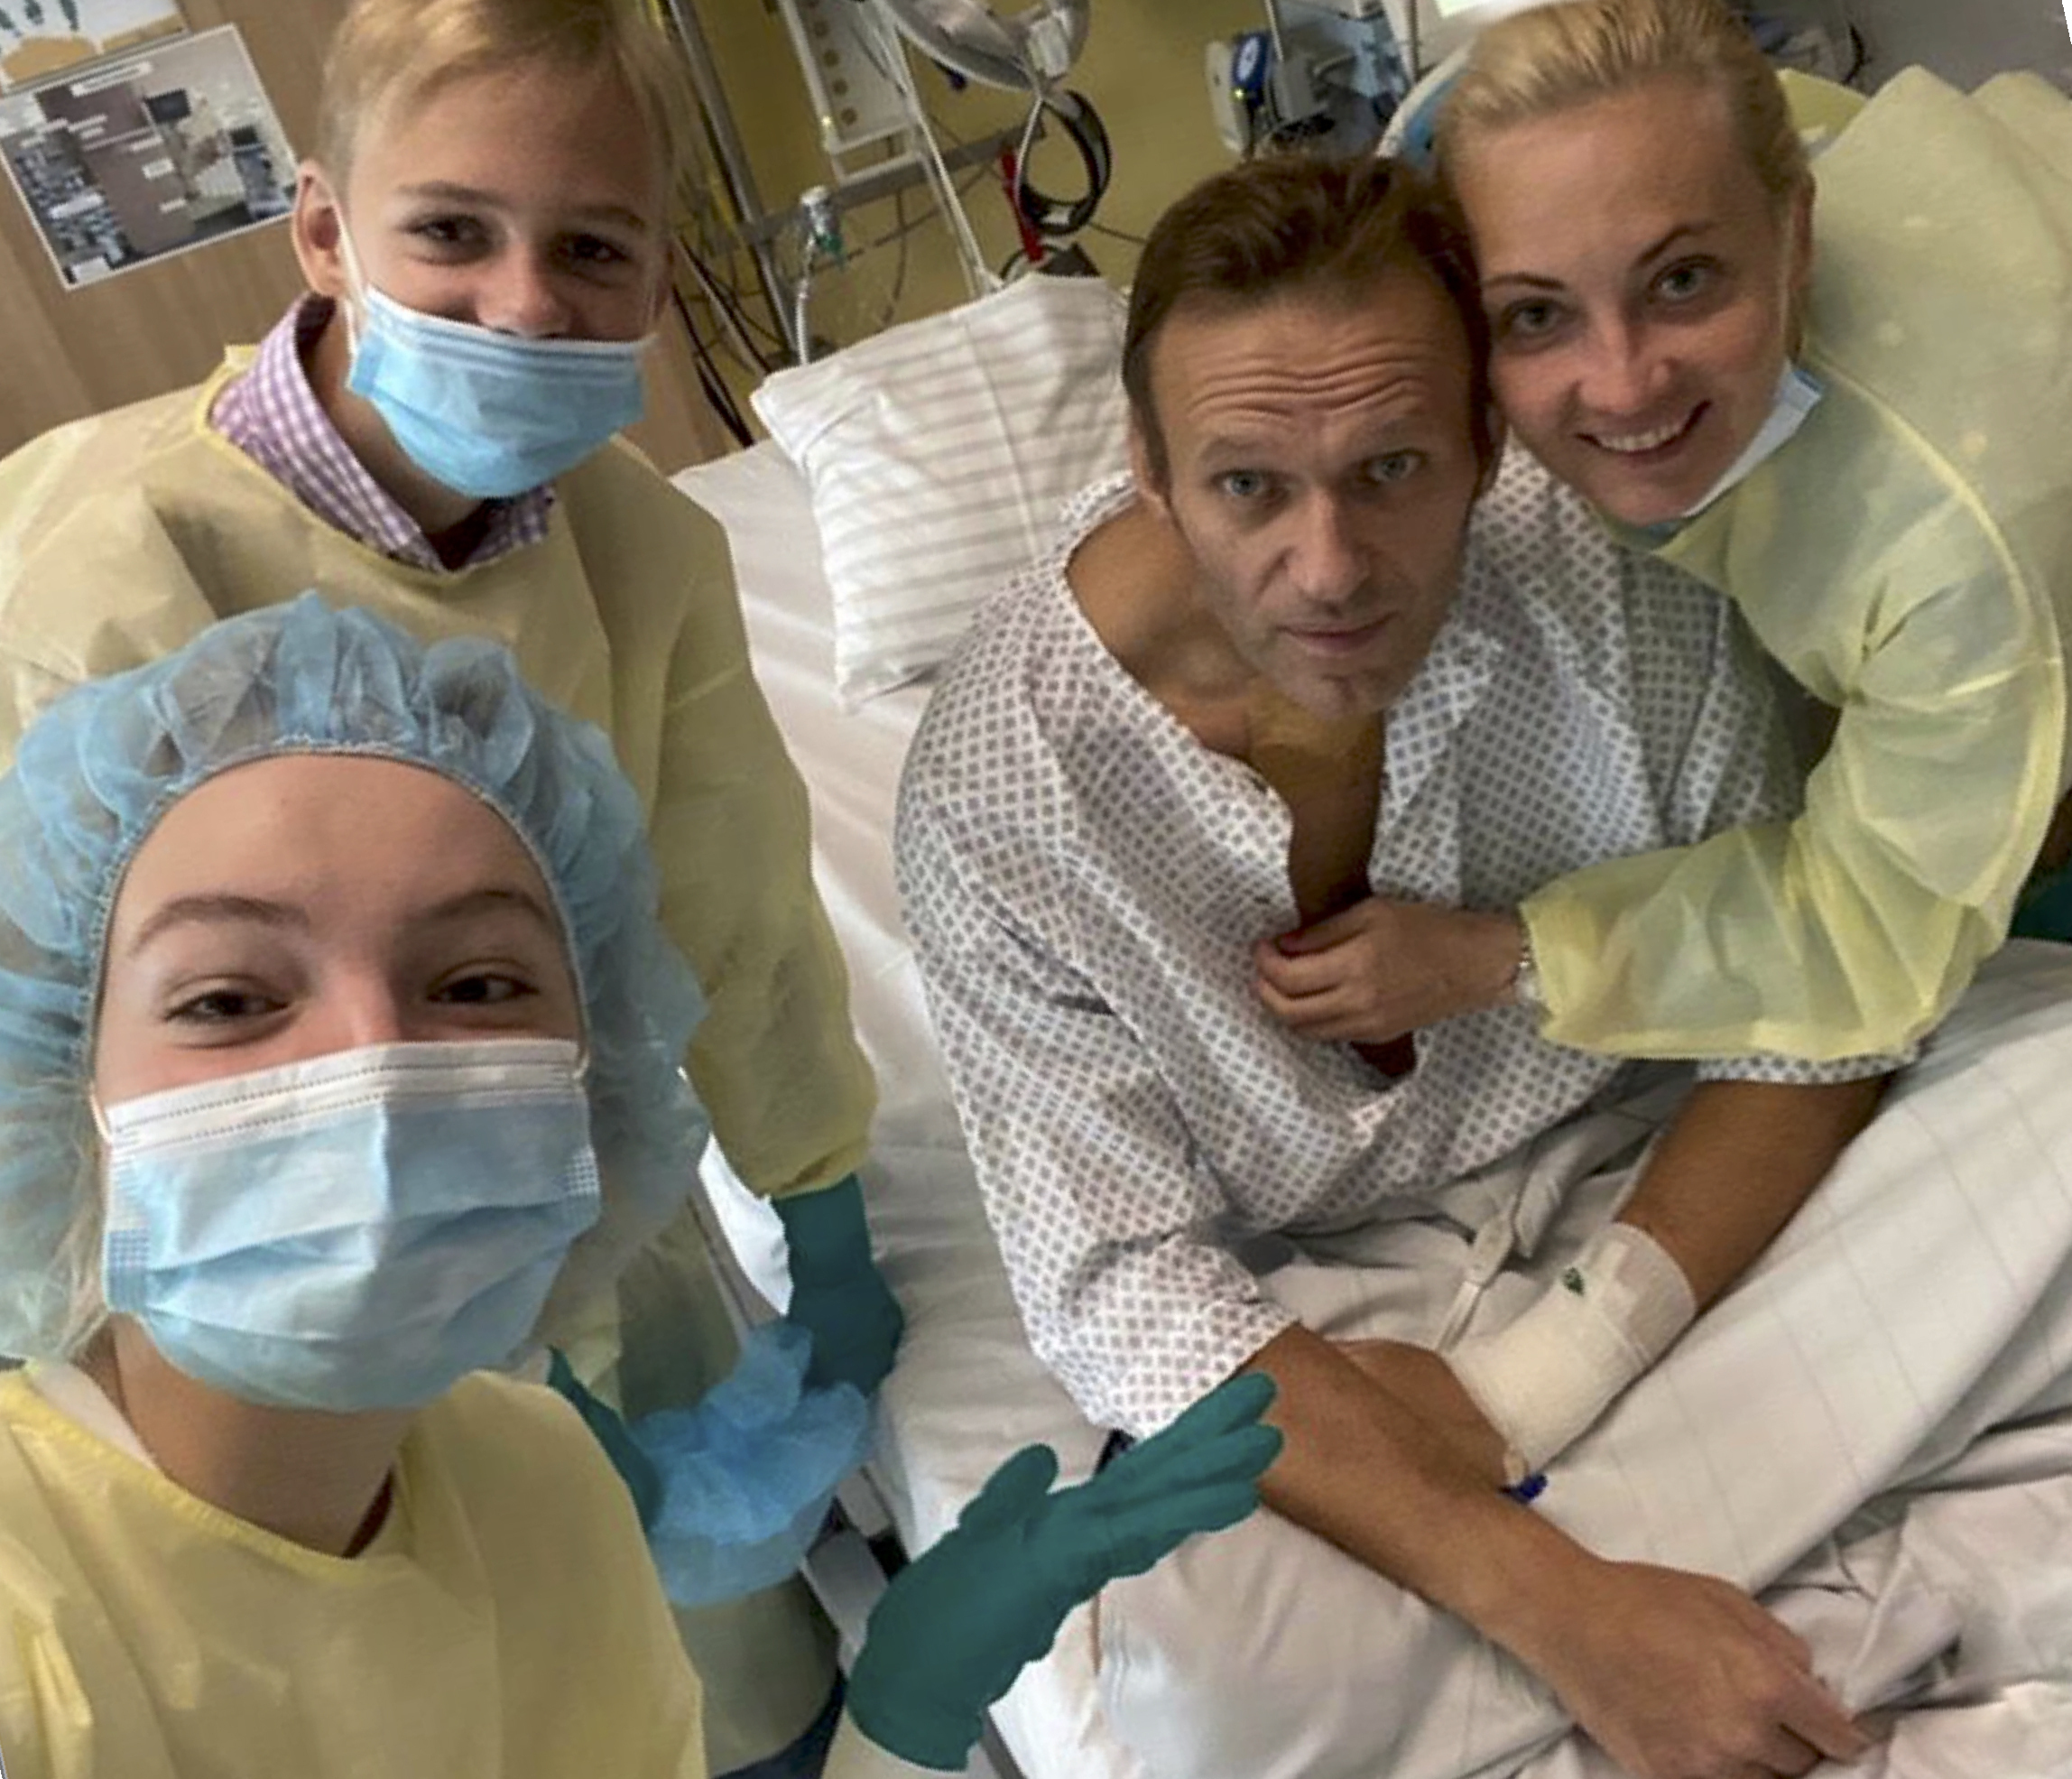 Alexei Navalny with his wife Yulia, daughter Daria, and son Zakhar at his hospital bed